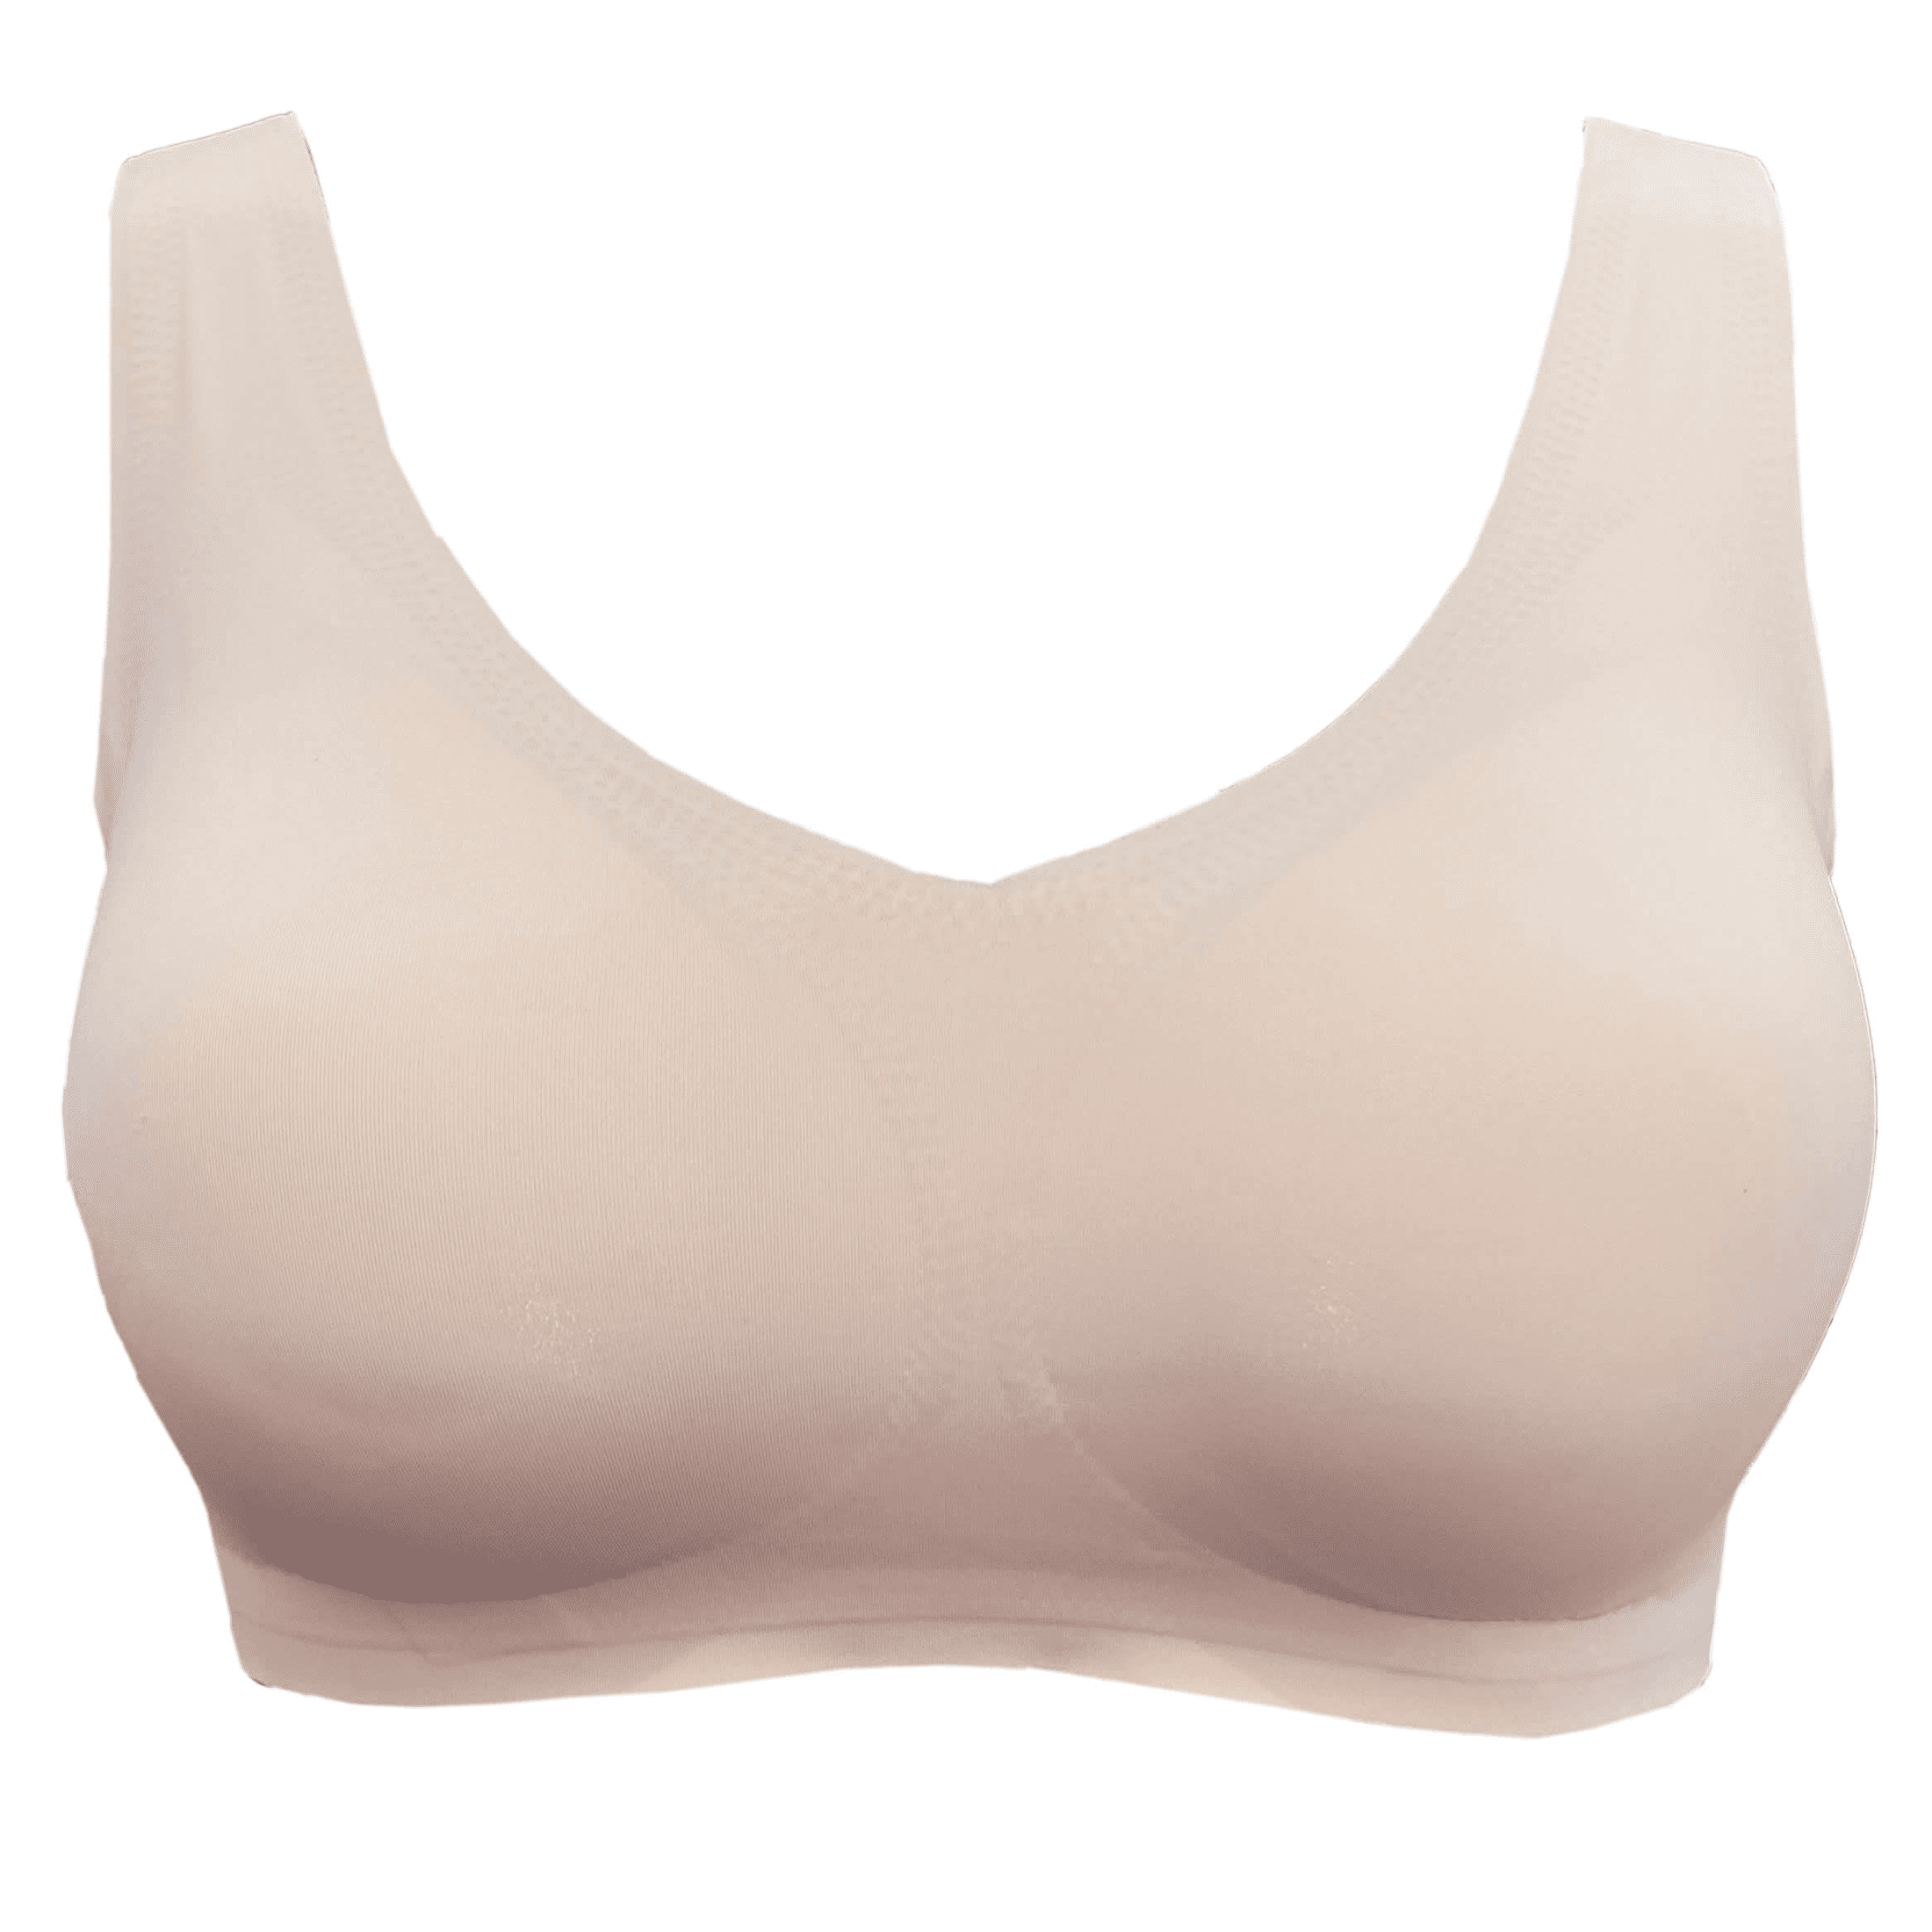 Large Busted Mastectomy Bra Underwear for Women Fake Breast Form Prosthesis  One Piece Sleep Sports Bras with Pockets (Color : Beige, Size 